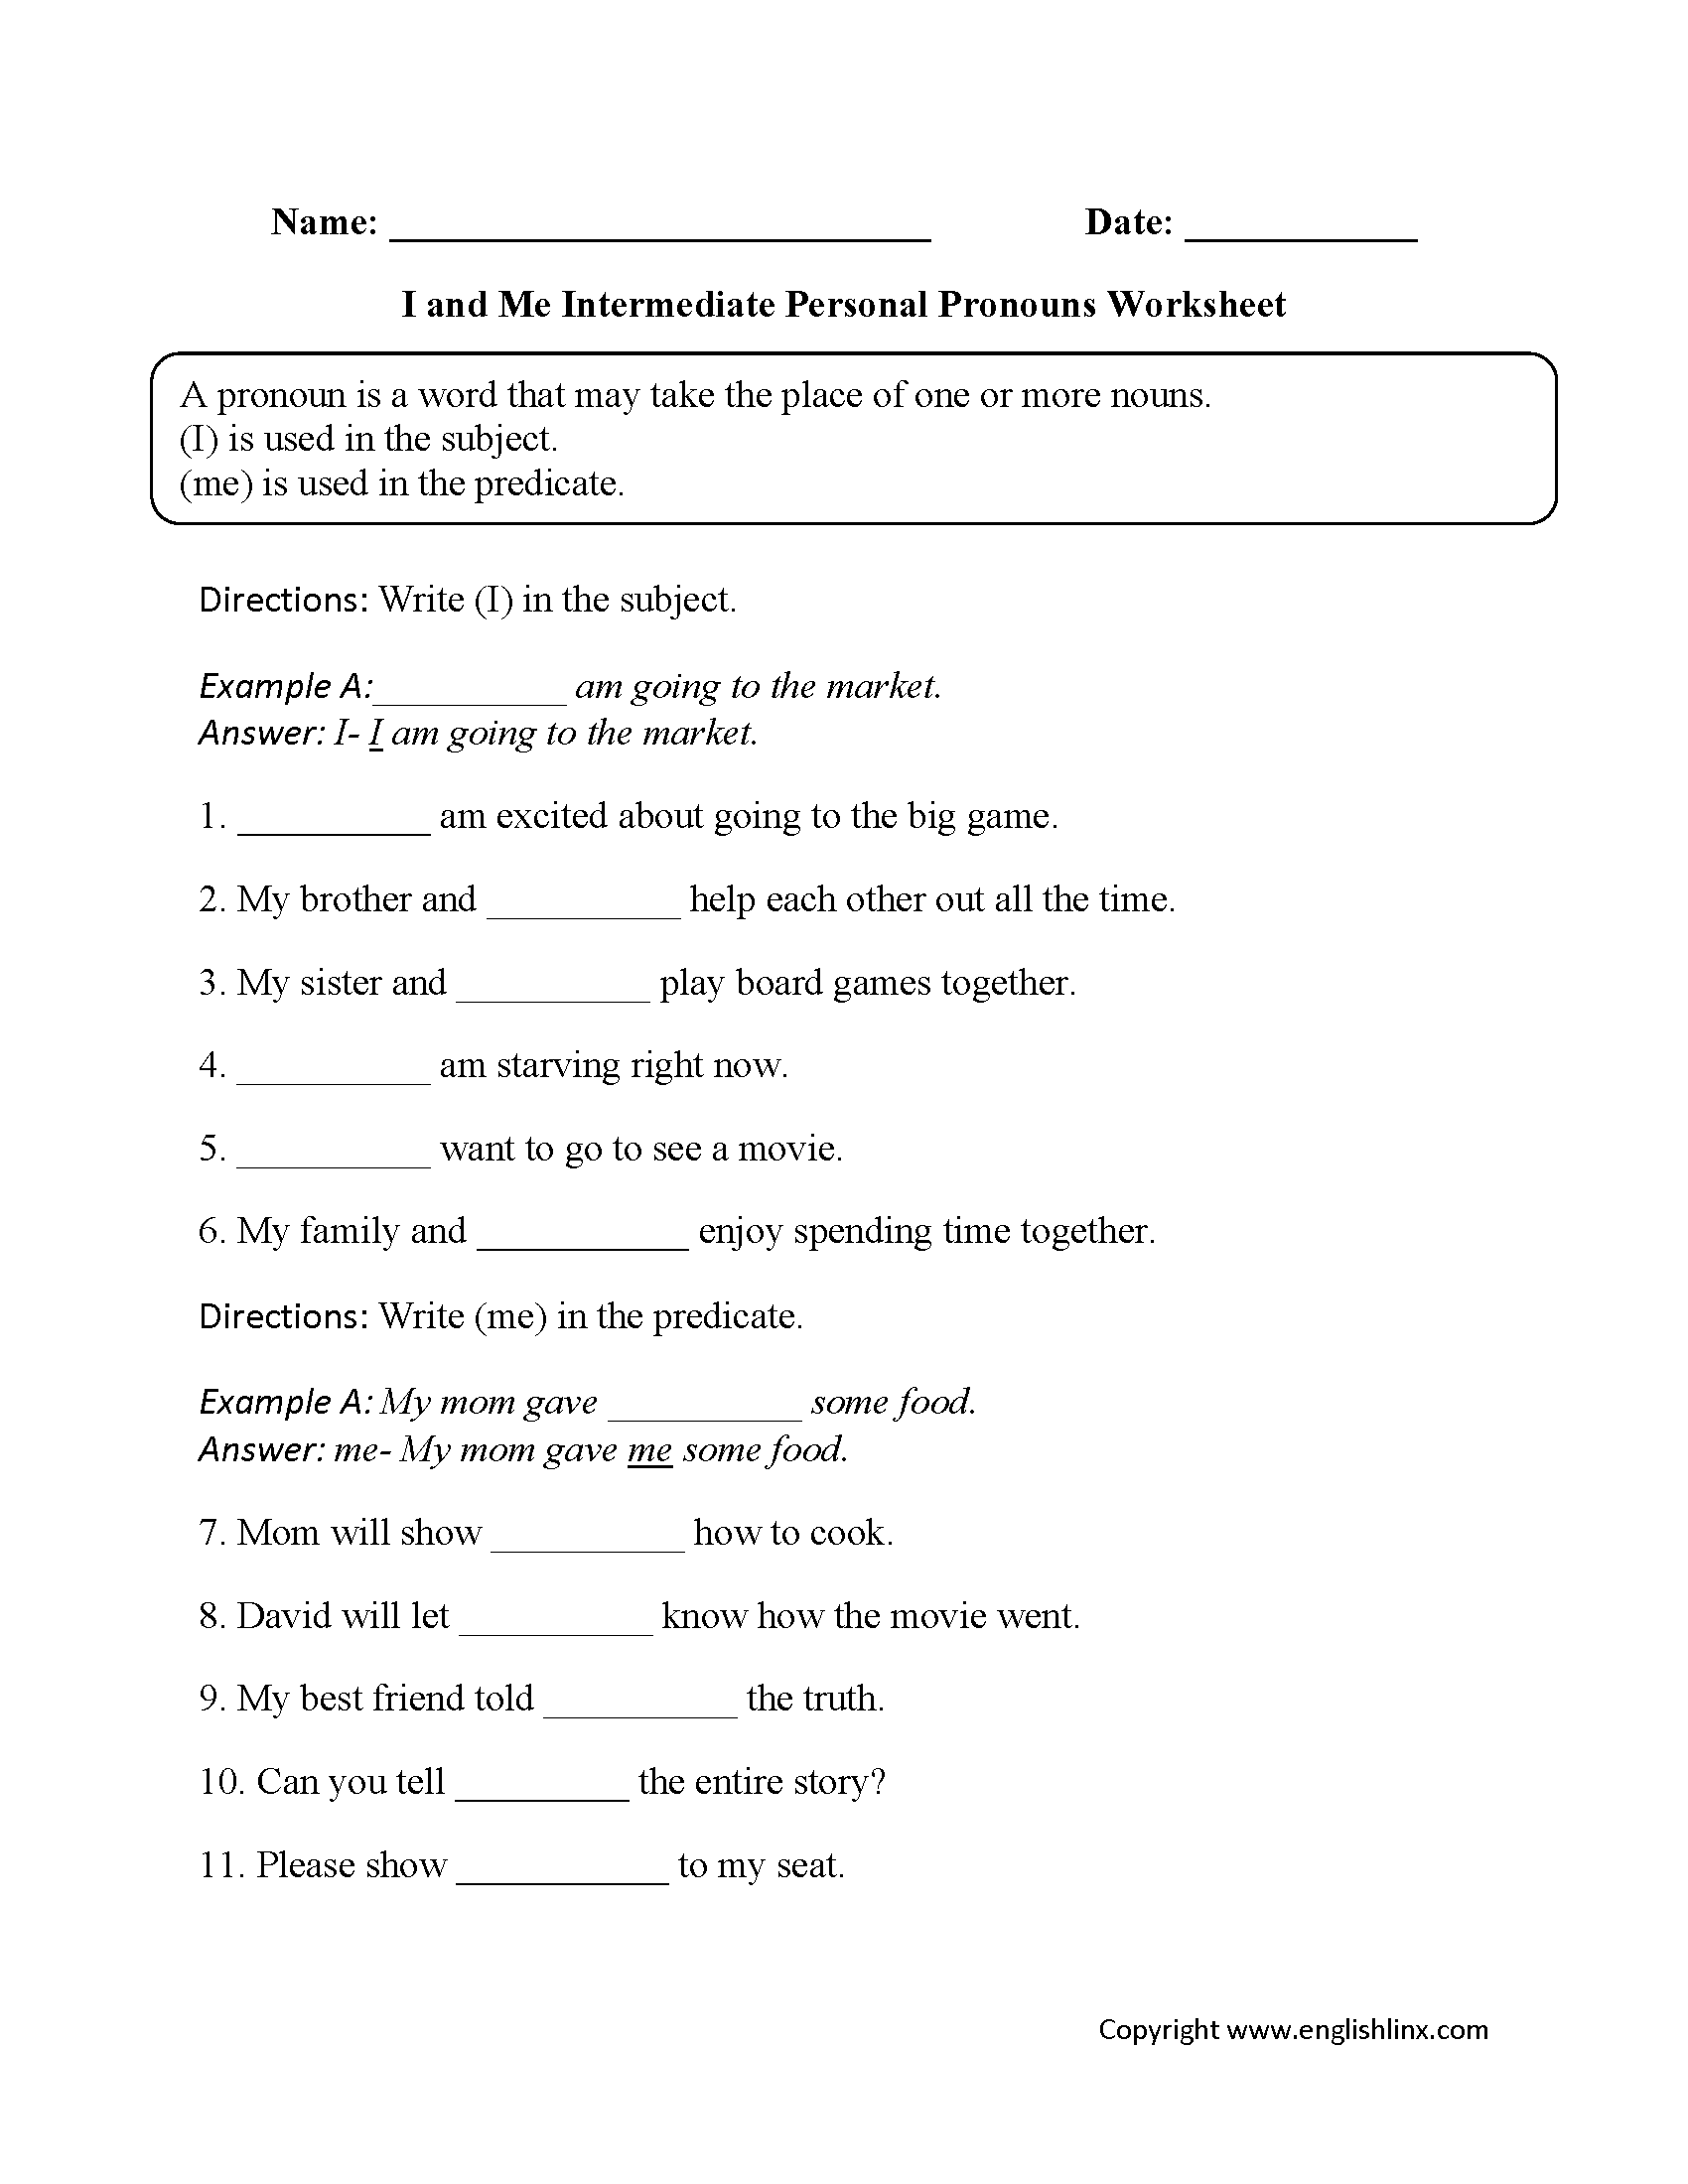 I and Me Intermediate Personal Pronouns Worksheets